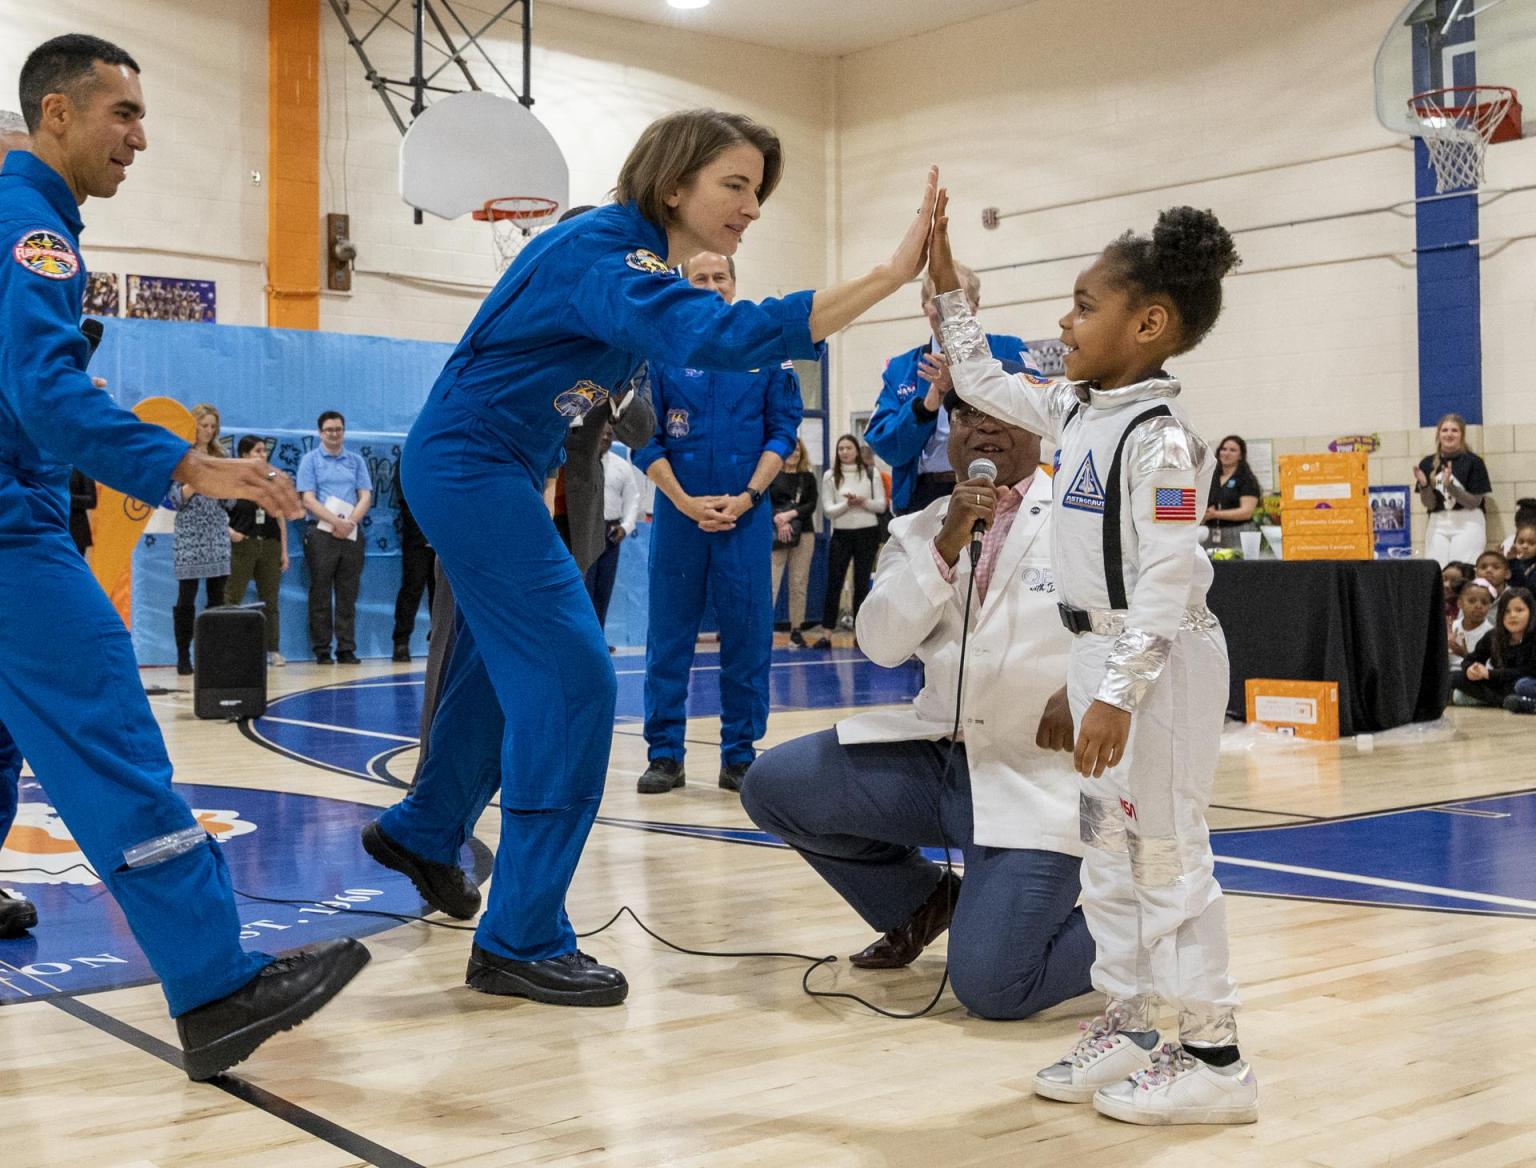 NASA astronaut Kayla Barron high-fives a student dressed in a spacesuit costume during a visit to Amidon-Bowen Elementary School in Washington D.C.